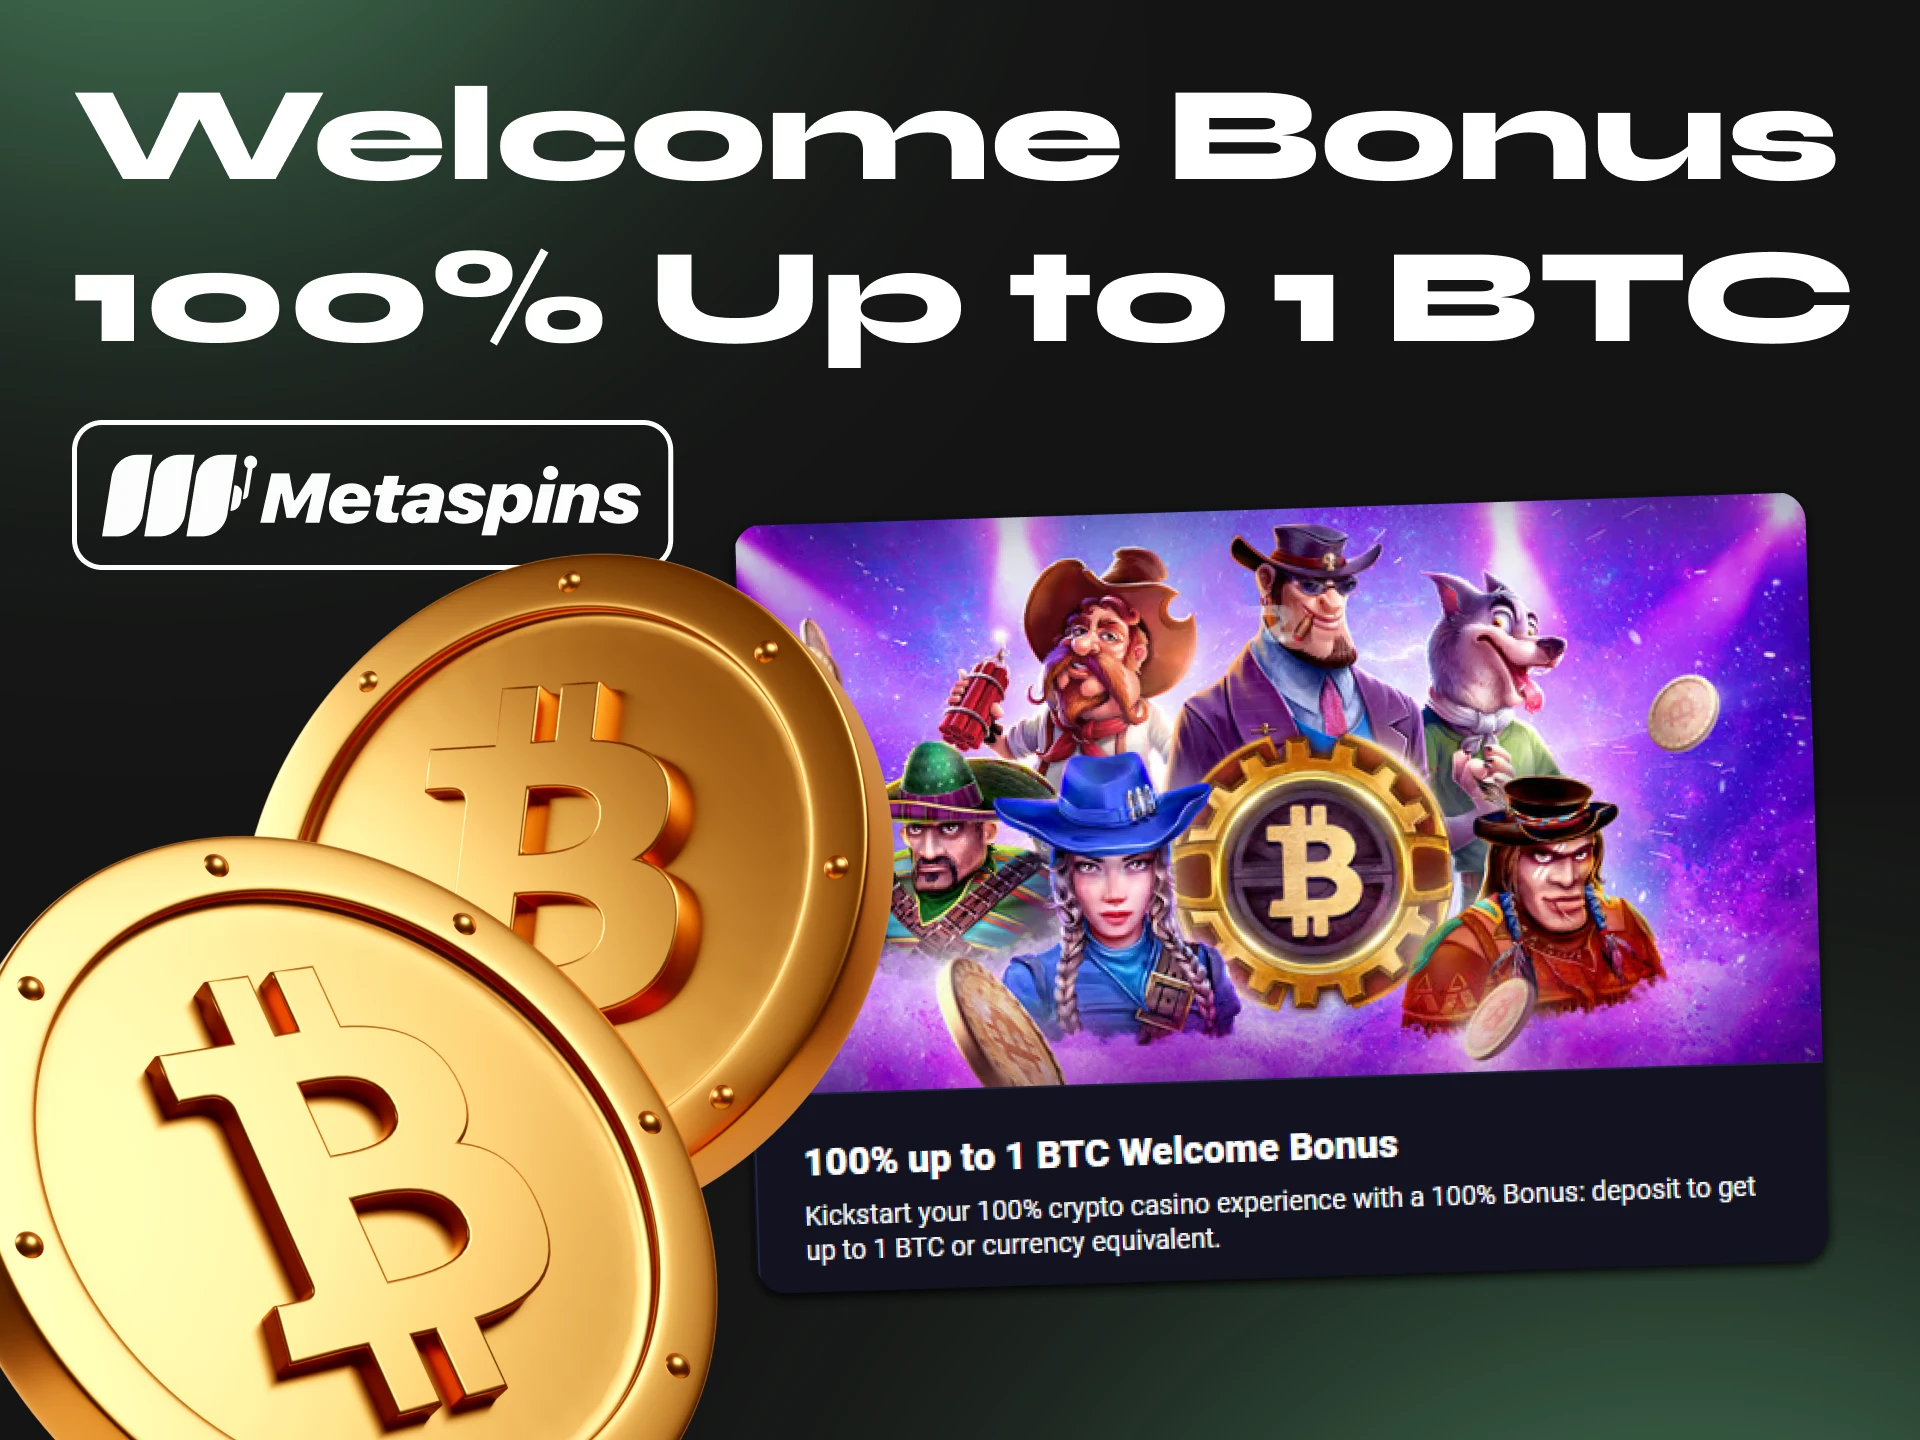 If you want to play poker, choose Metaspins Casino and their welcome bonus.